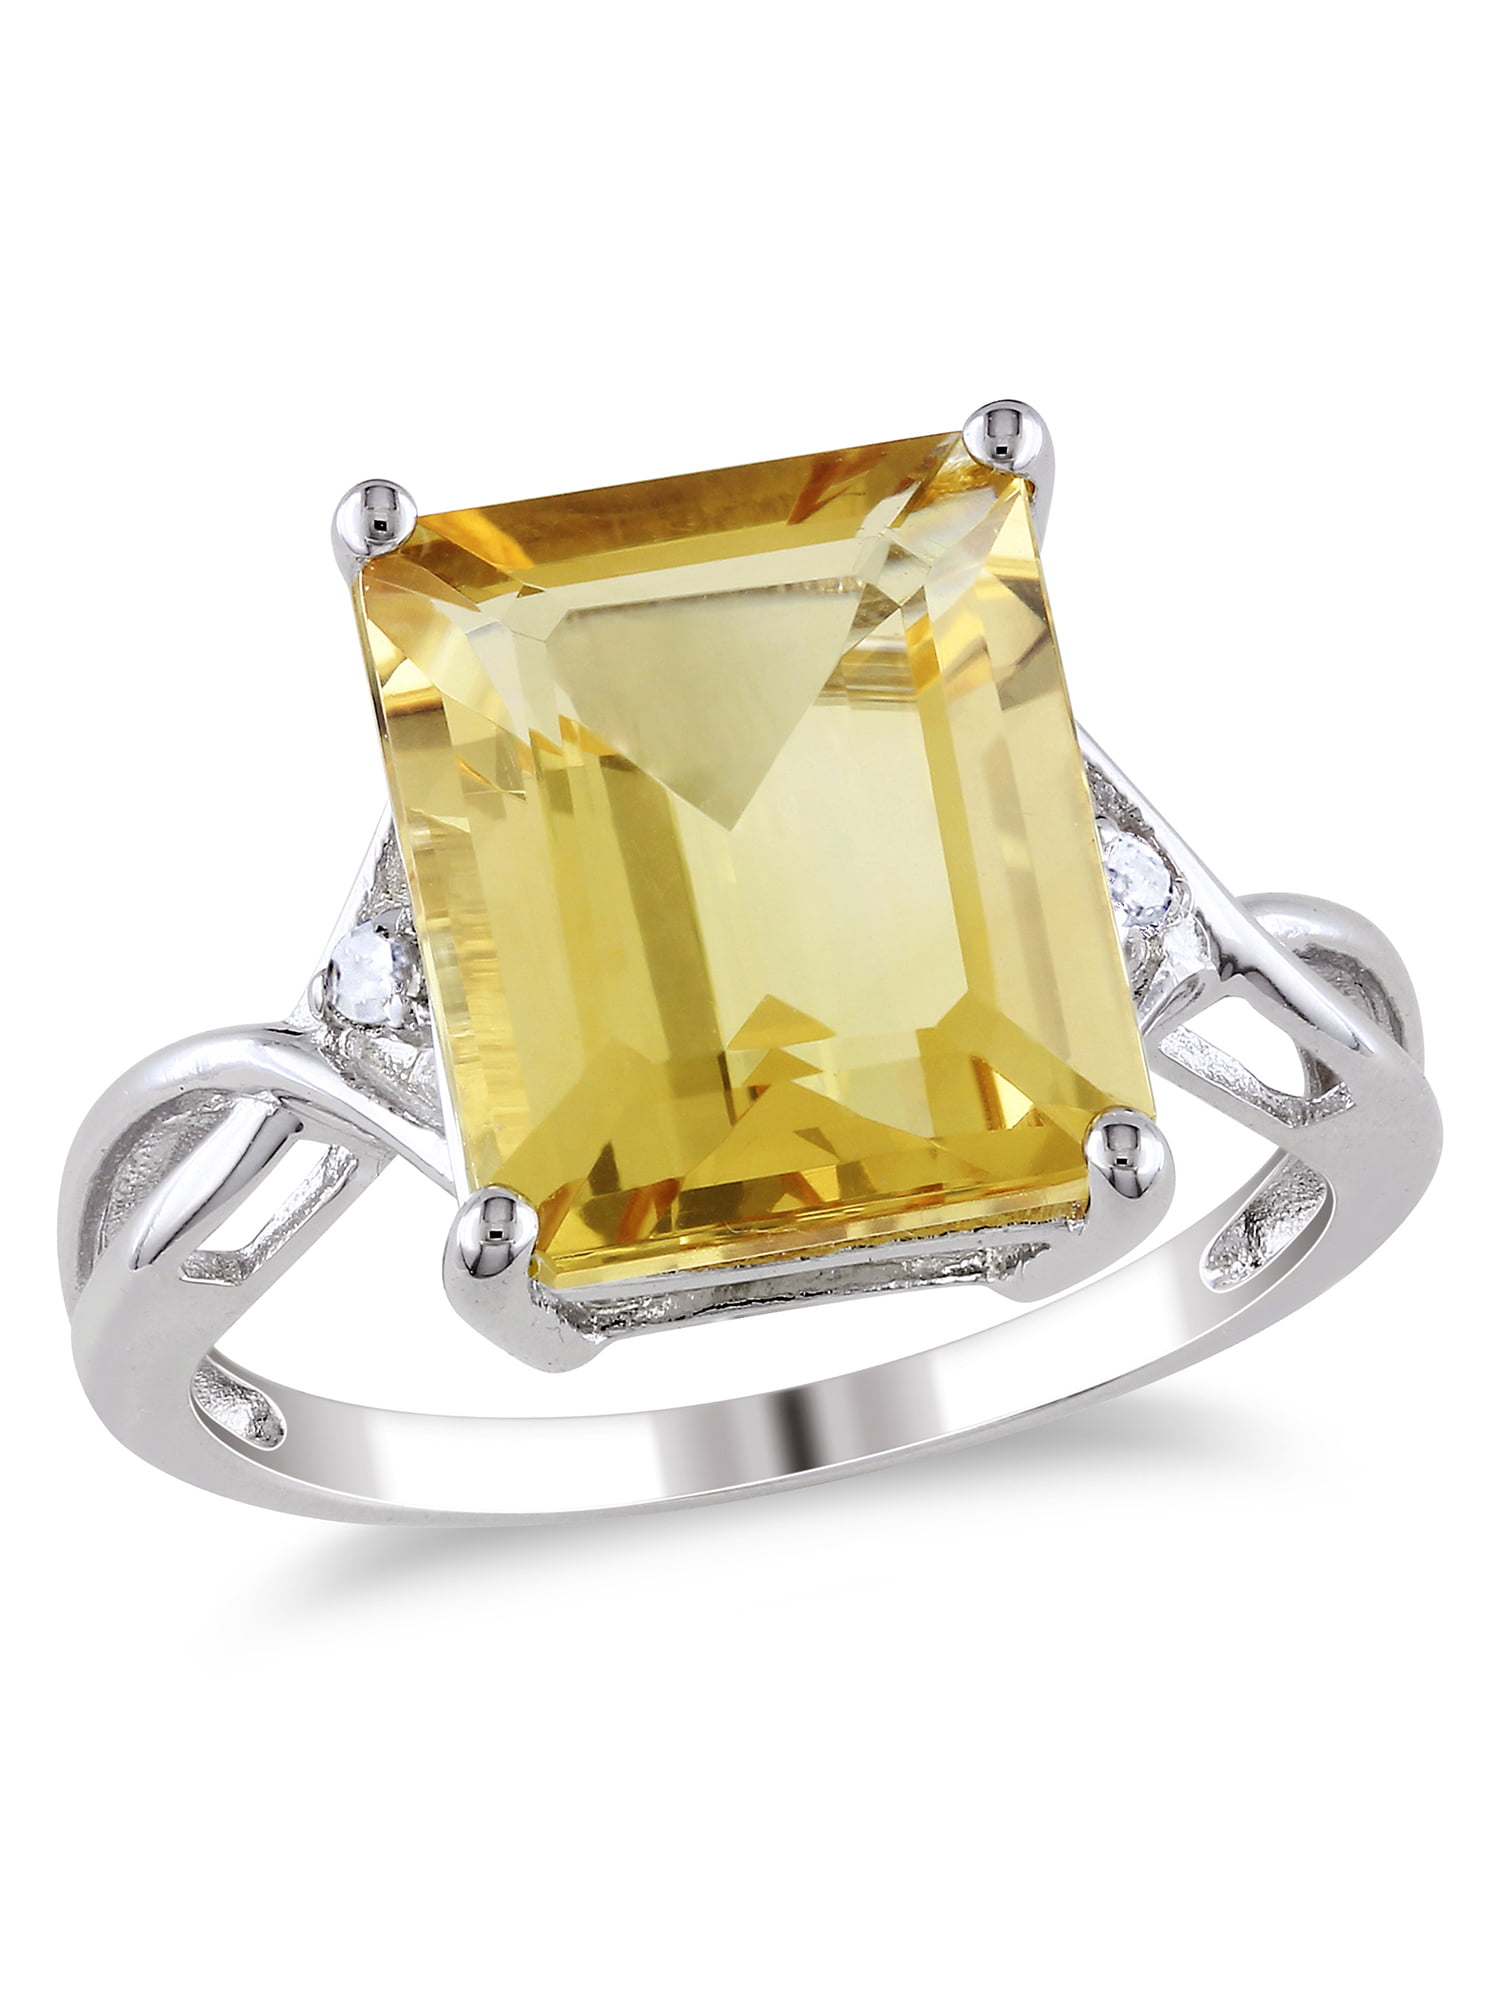 8ct Solitaire Yellow Topaz Cz 925 Silver Engagement Birthday Ring Band Sz 6-7-8 